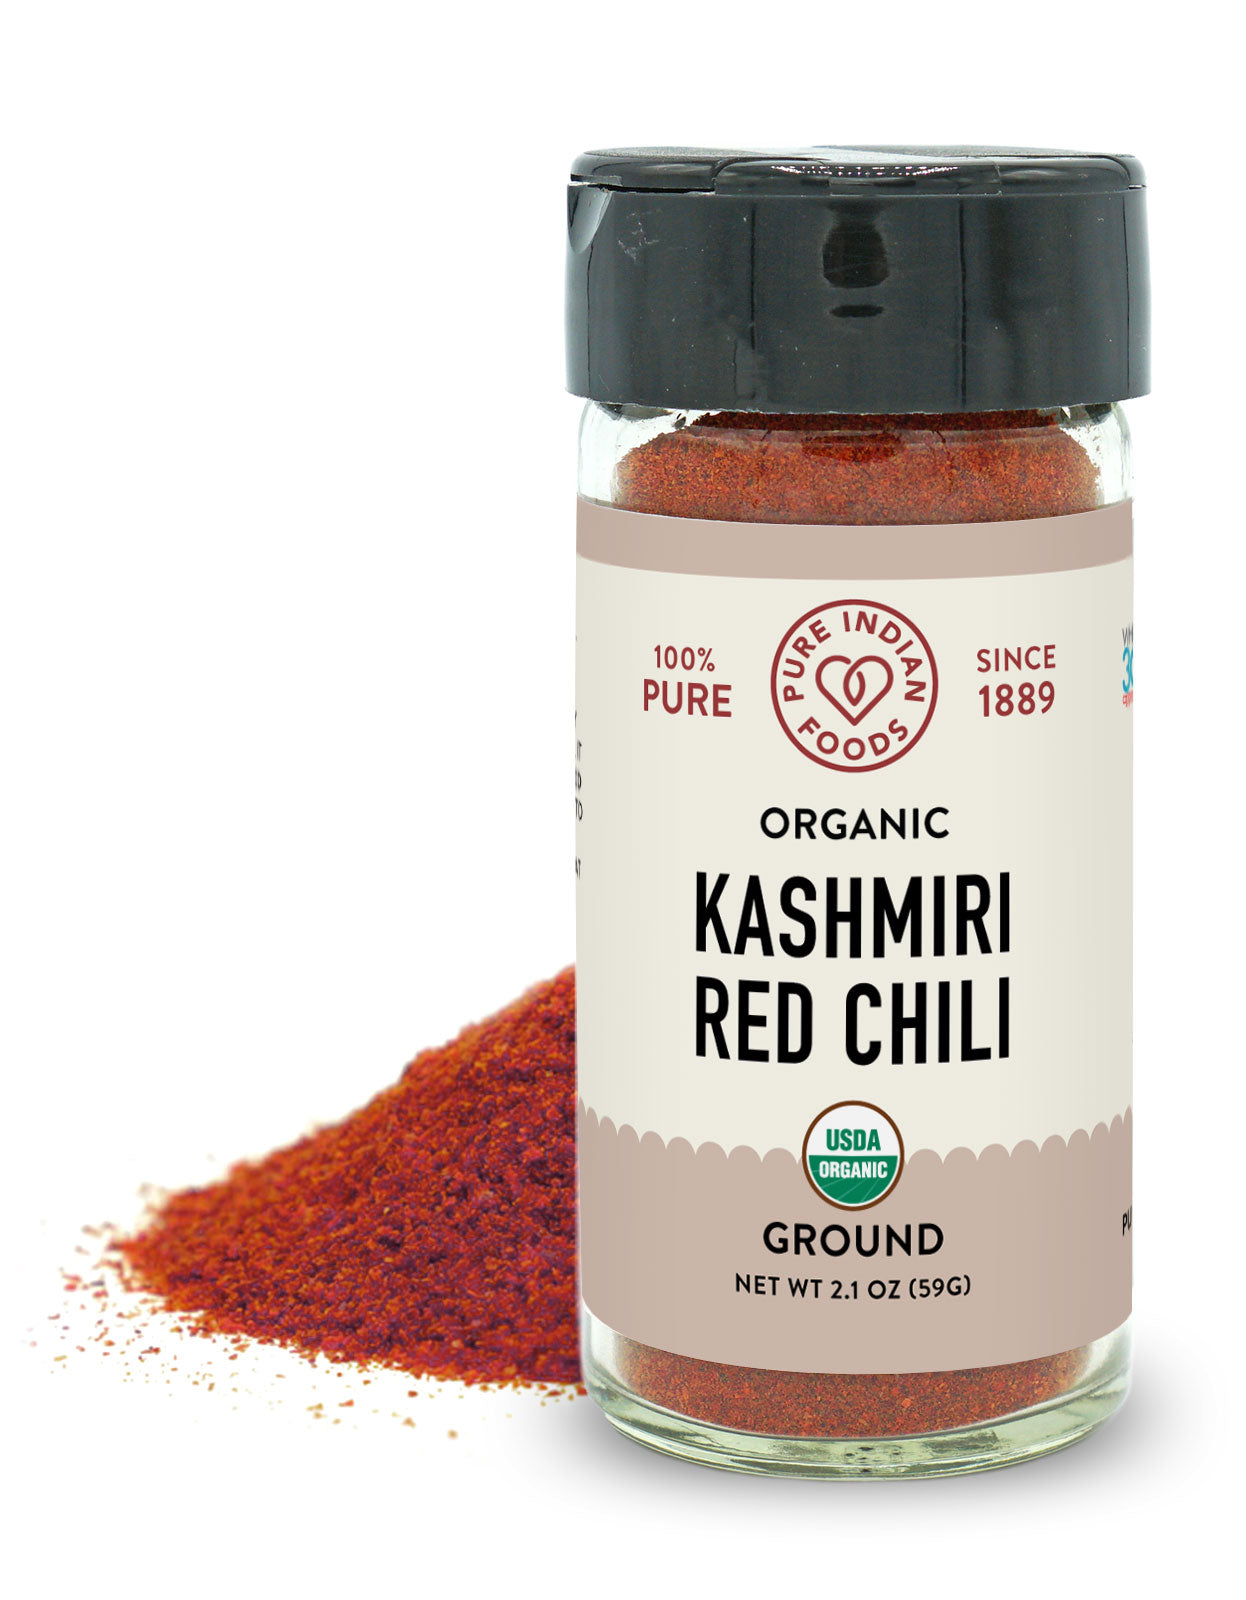 Jar of Pure Indian Foods Organic Kashmiri Red Chili Powder (deggi mirch). It's a beautiful bright red color. No food coloring, dyes, fillers, or additives. 100% Pure. Perfect for curries!